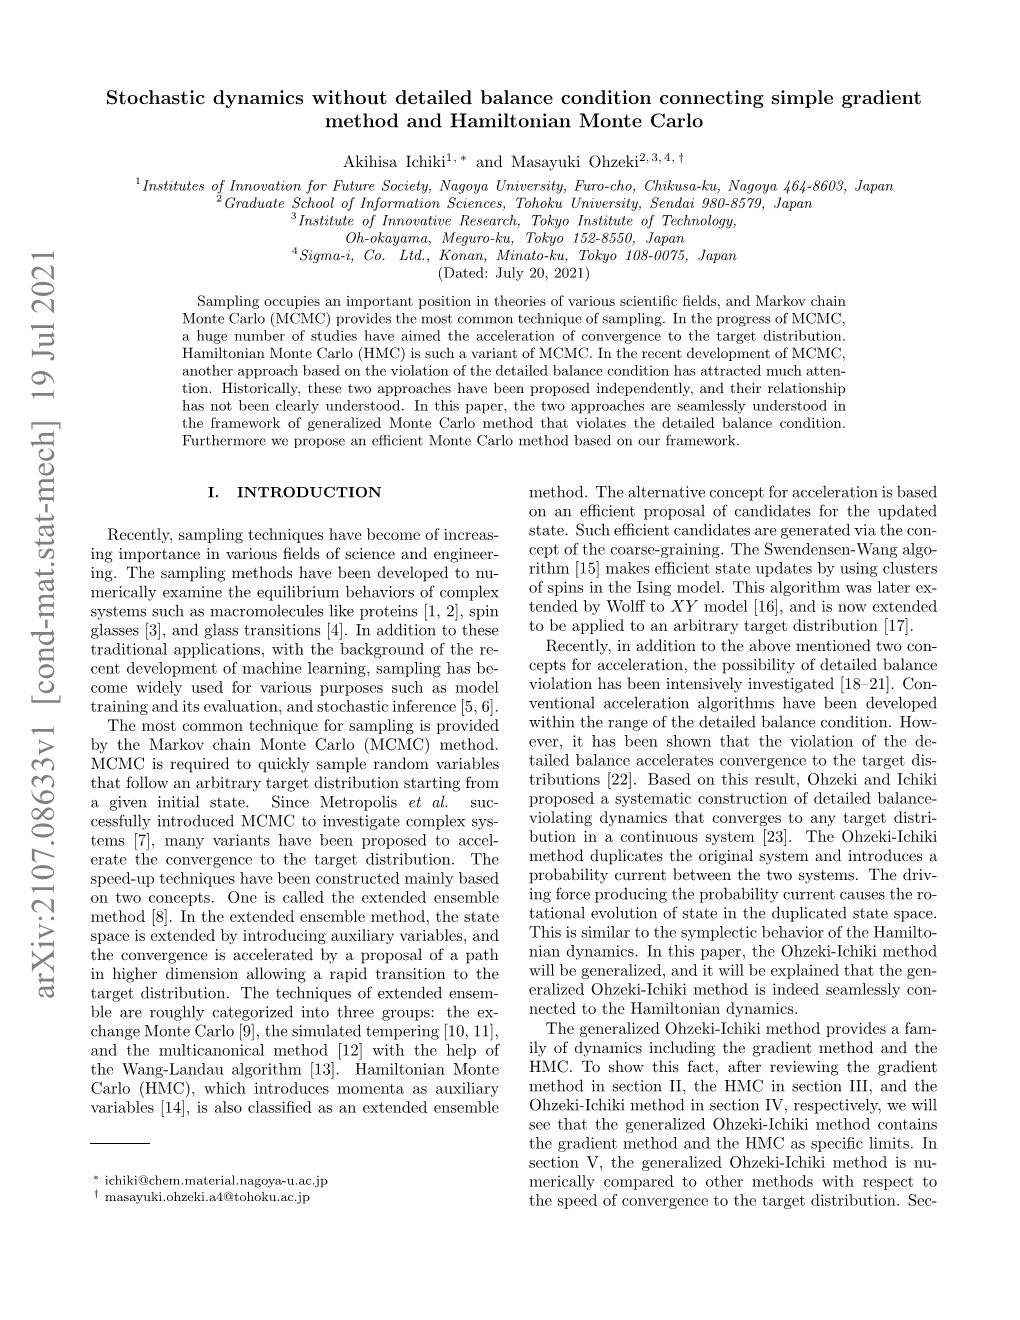 Stochastic Dynamics Without Detailed Balance Condition Connecting Simple Gradient Method and Hamiltonian Monte Carlo